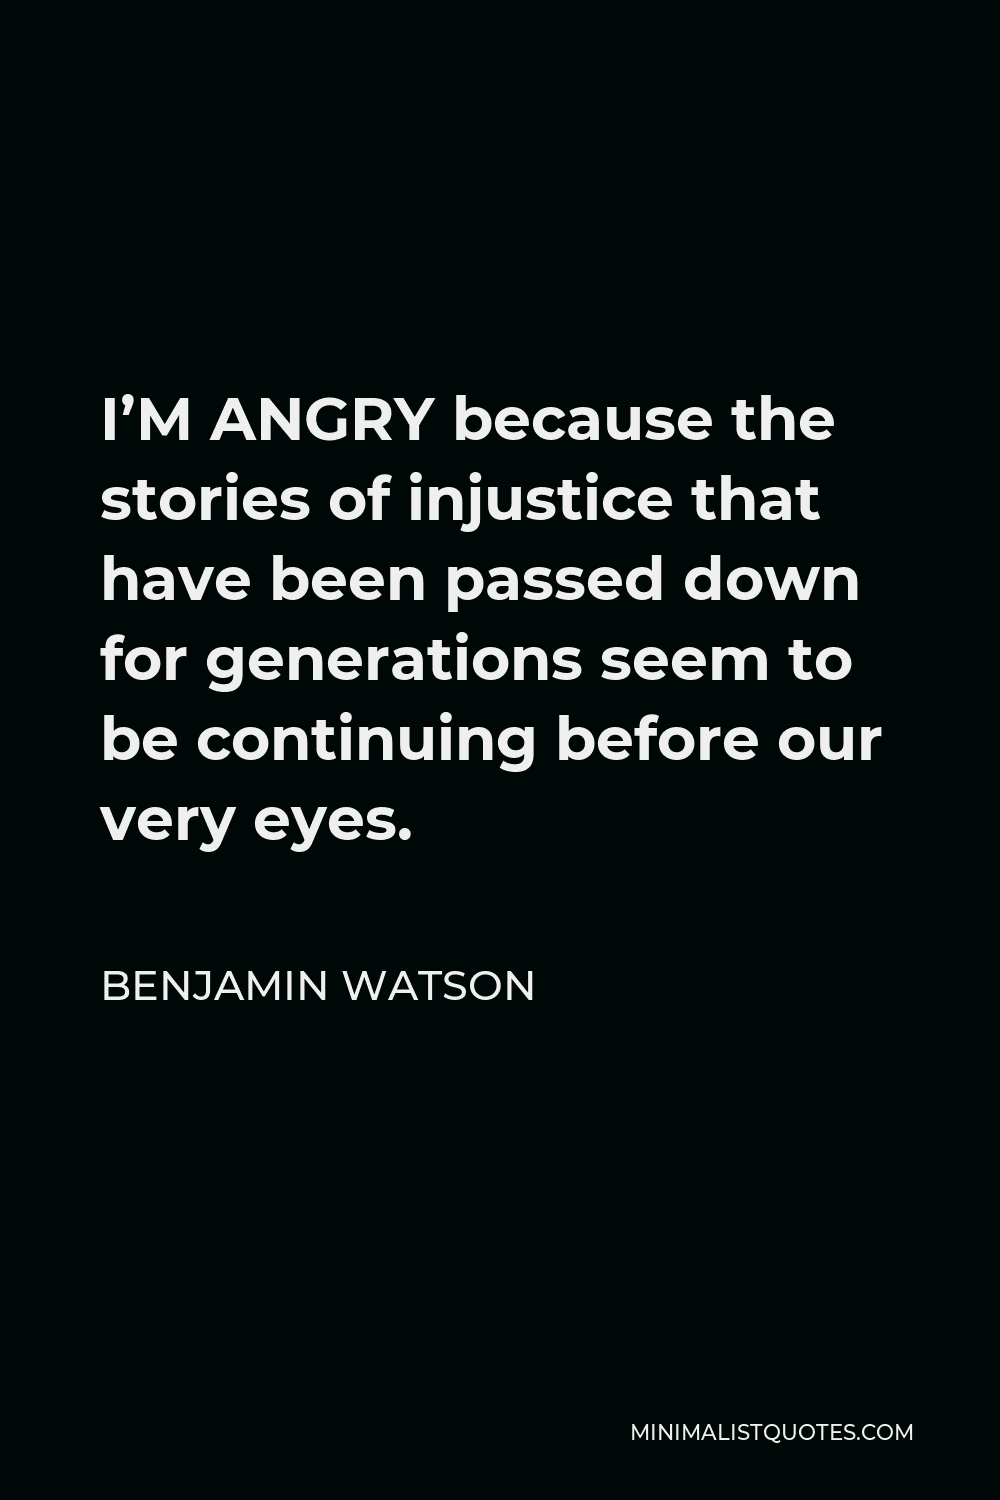 Benjamin Watson Quote - I’M ANGRY because the stories of injustice that have been passed down for generations seem to be continuing before our very eyes.